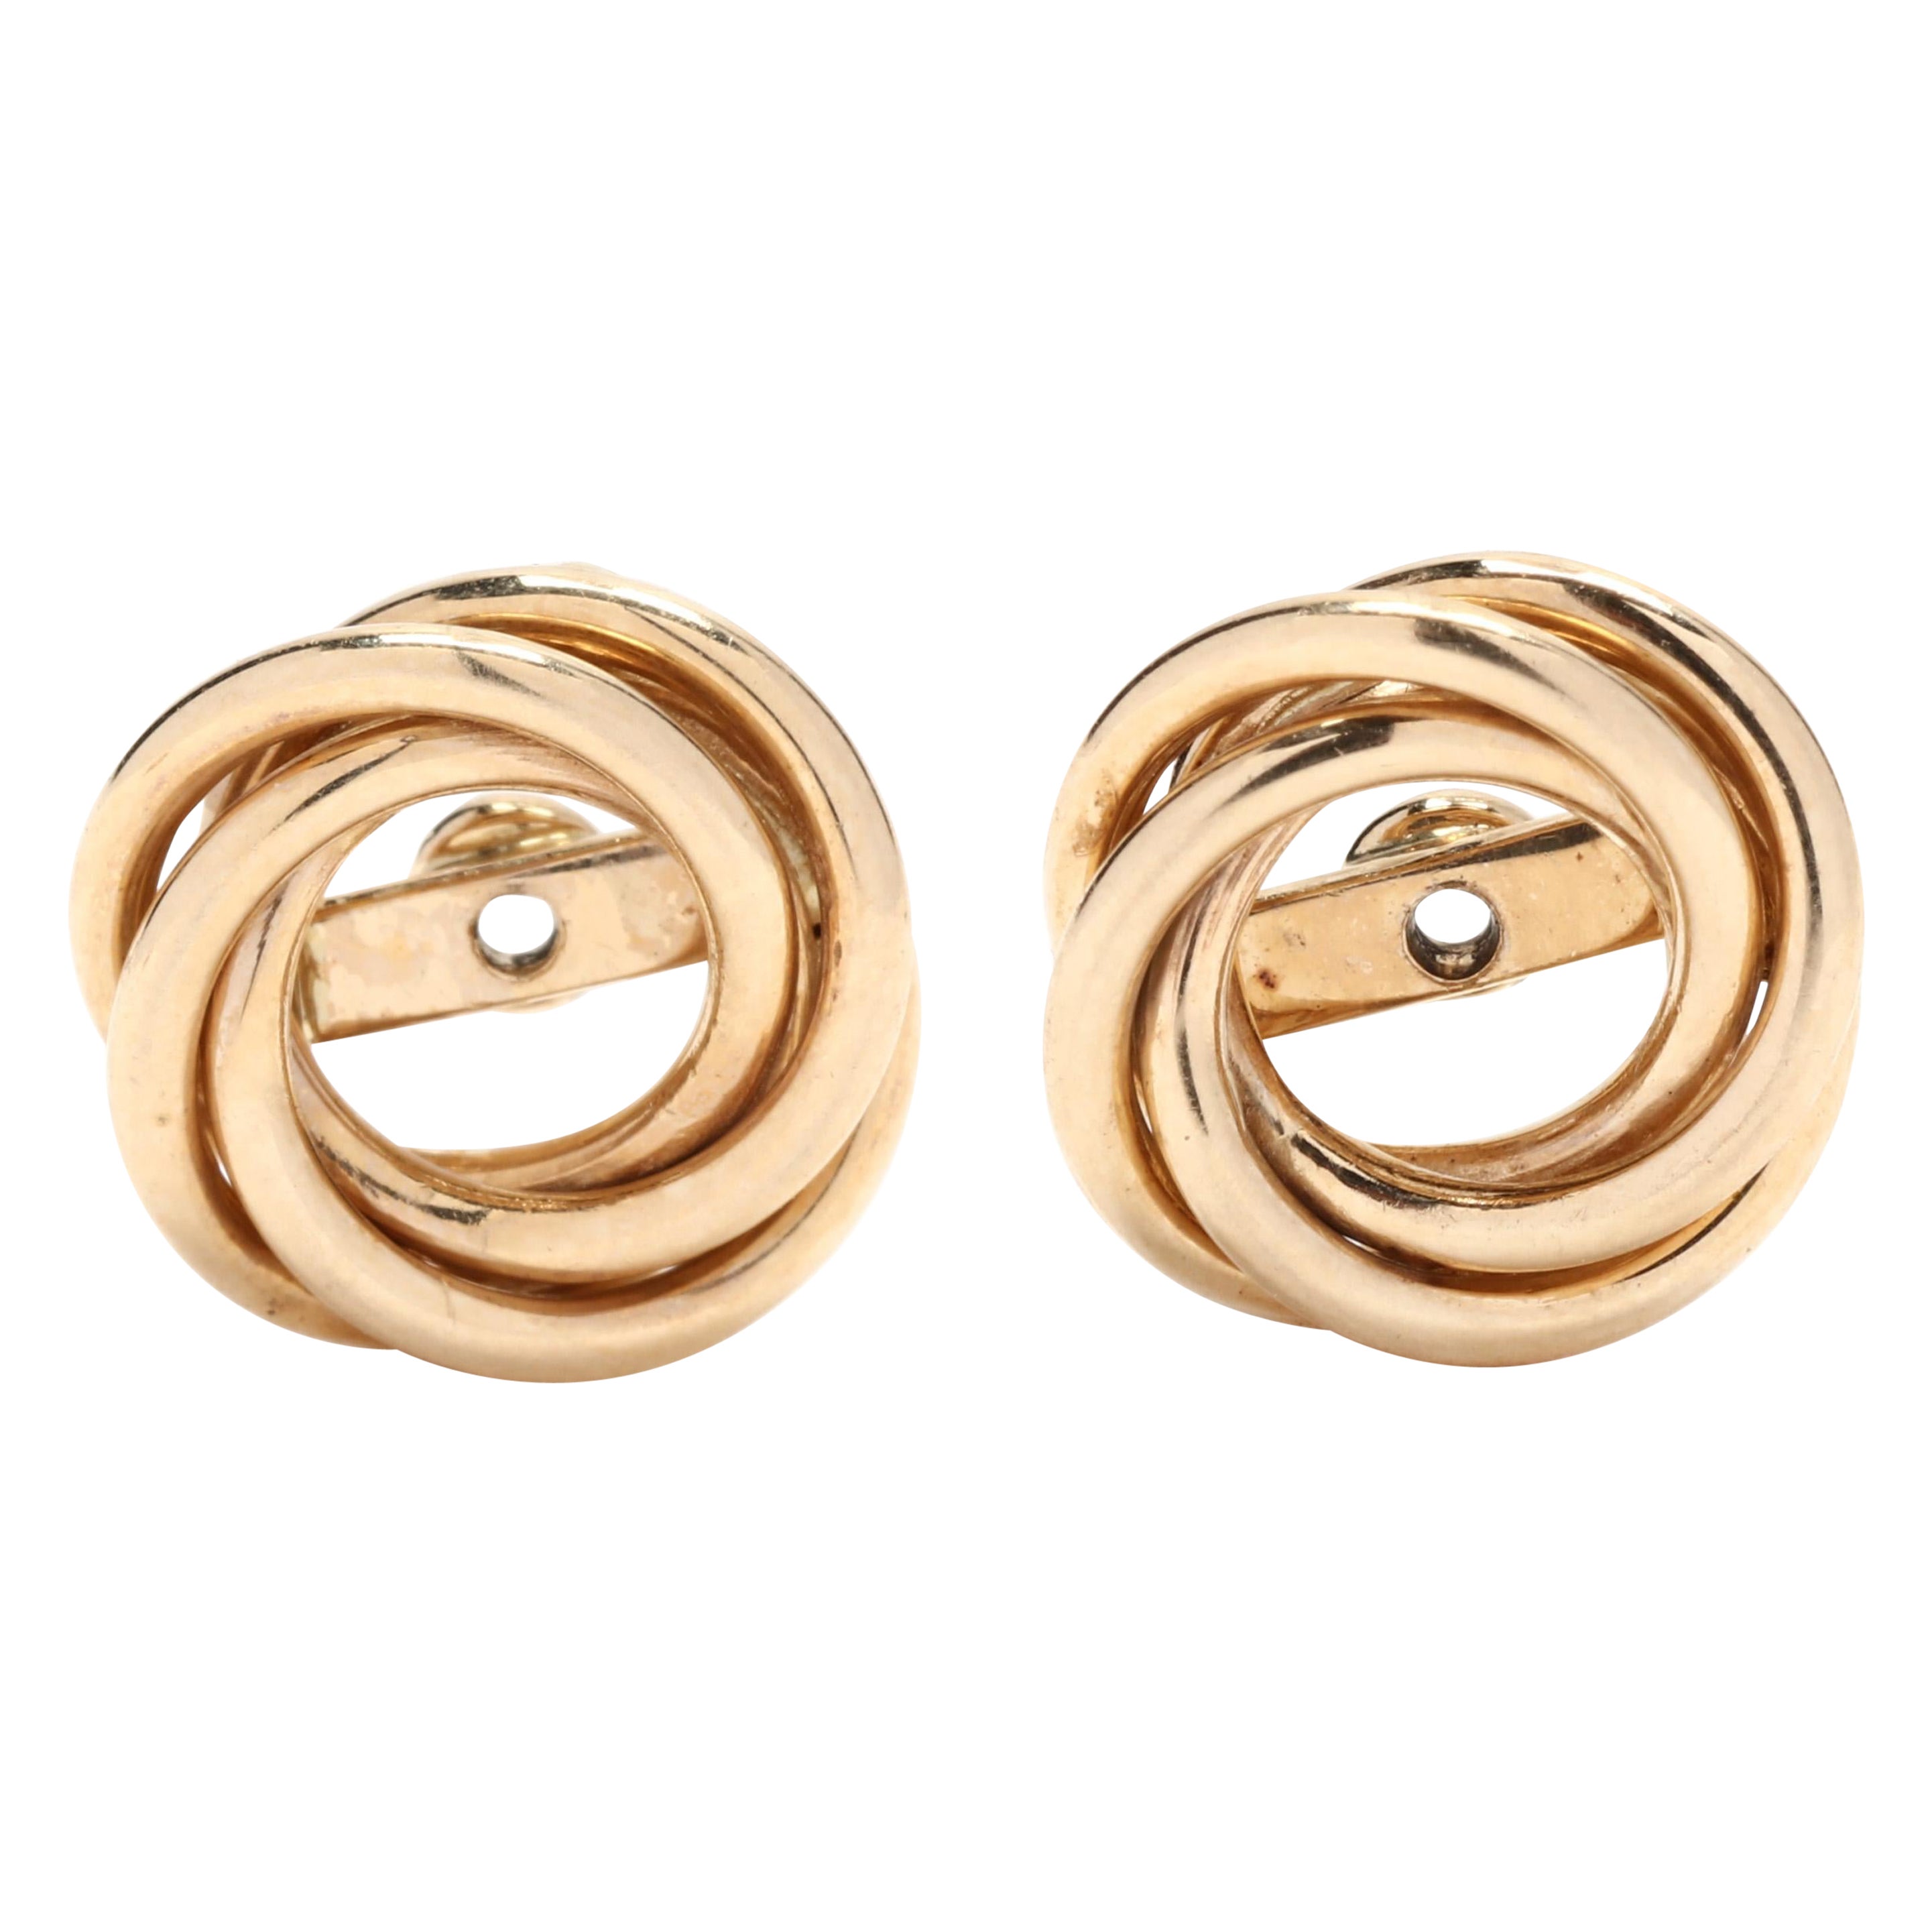 Gold Knot Earring Jackets, 14kt Yellow Gold